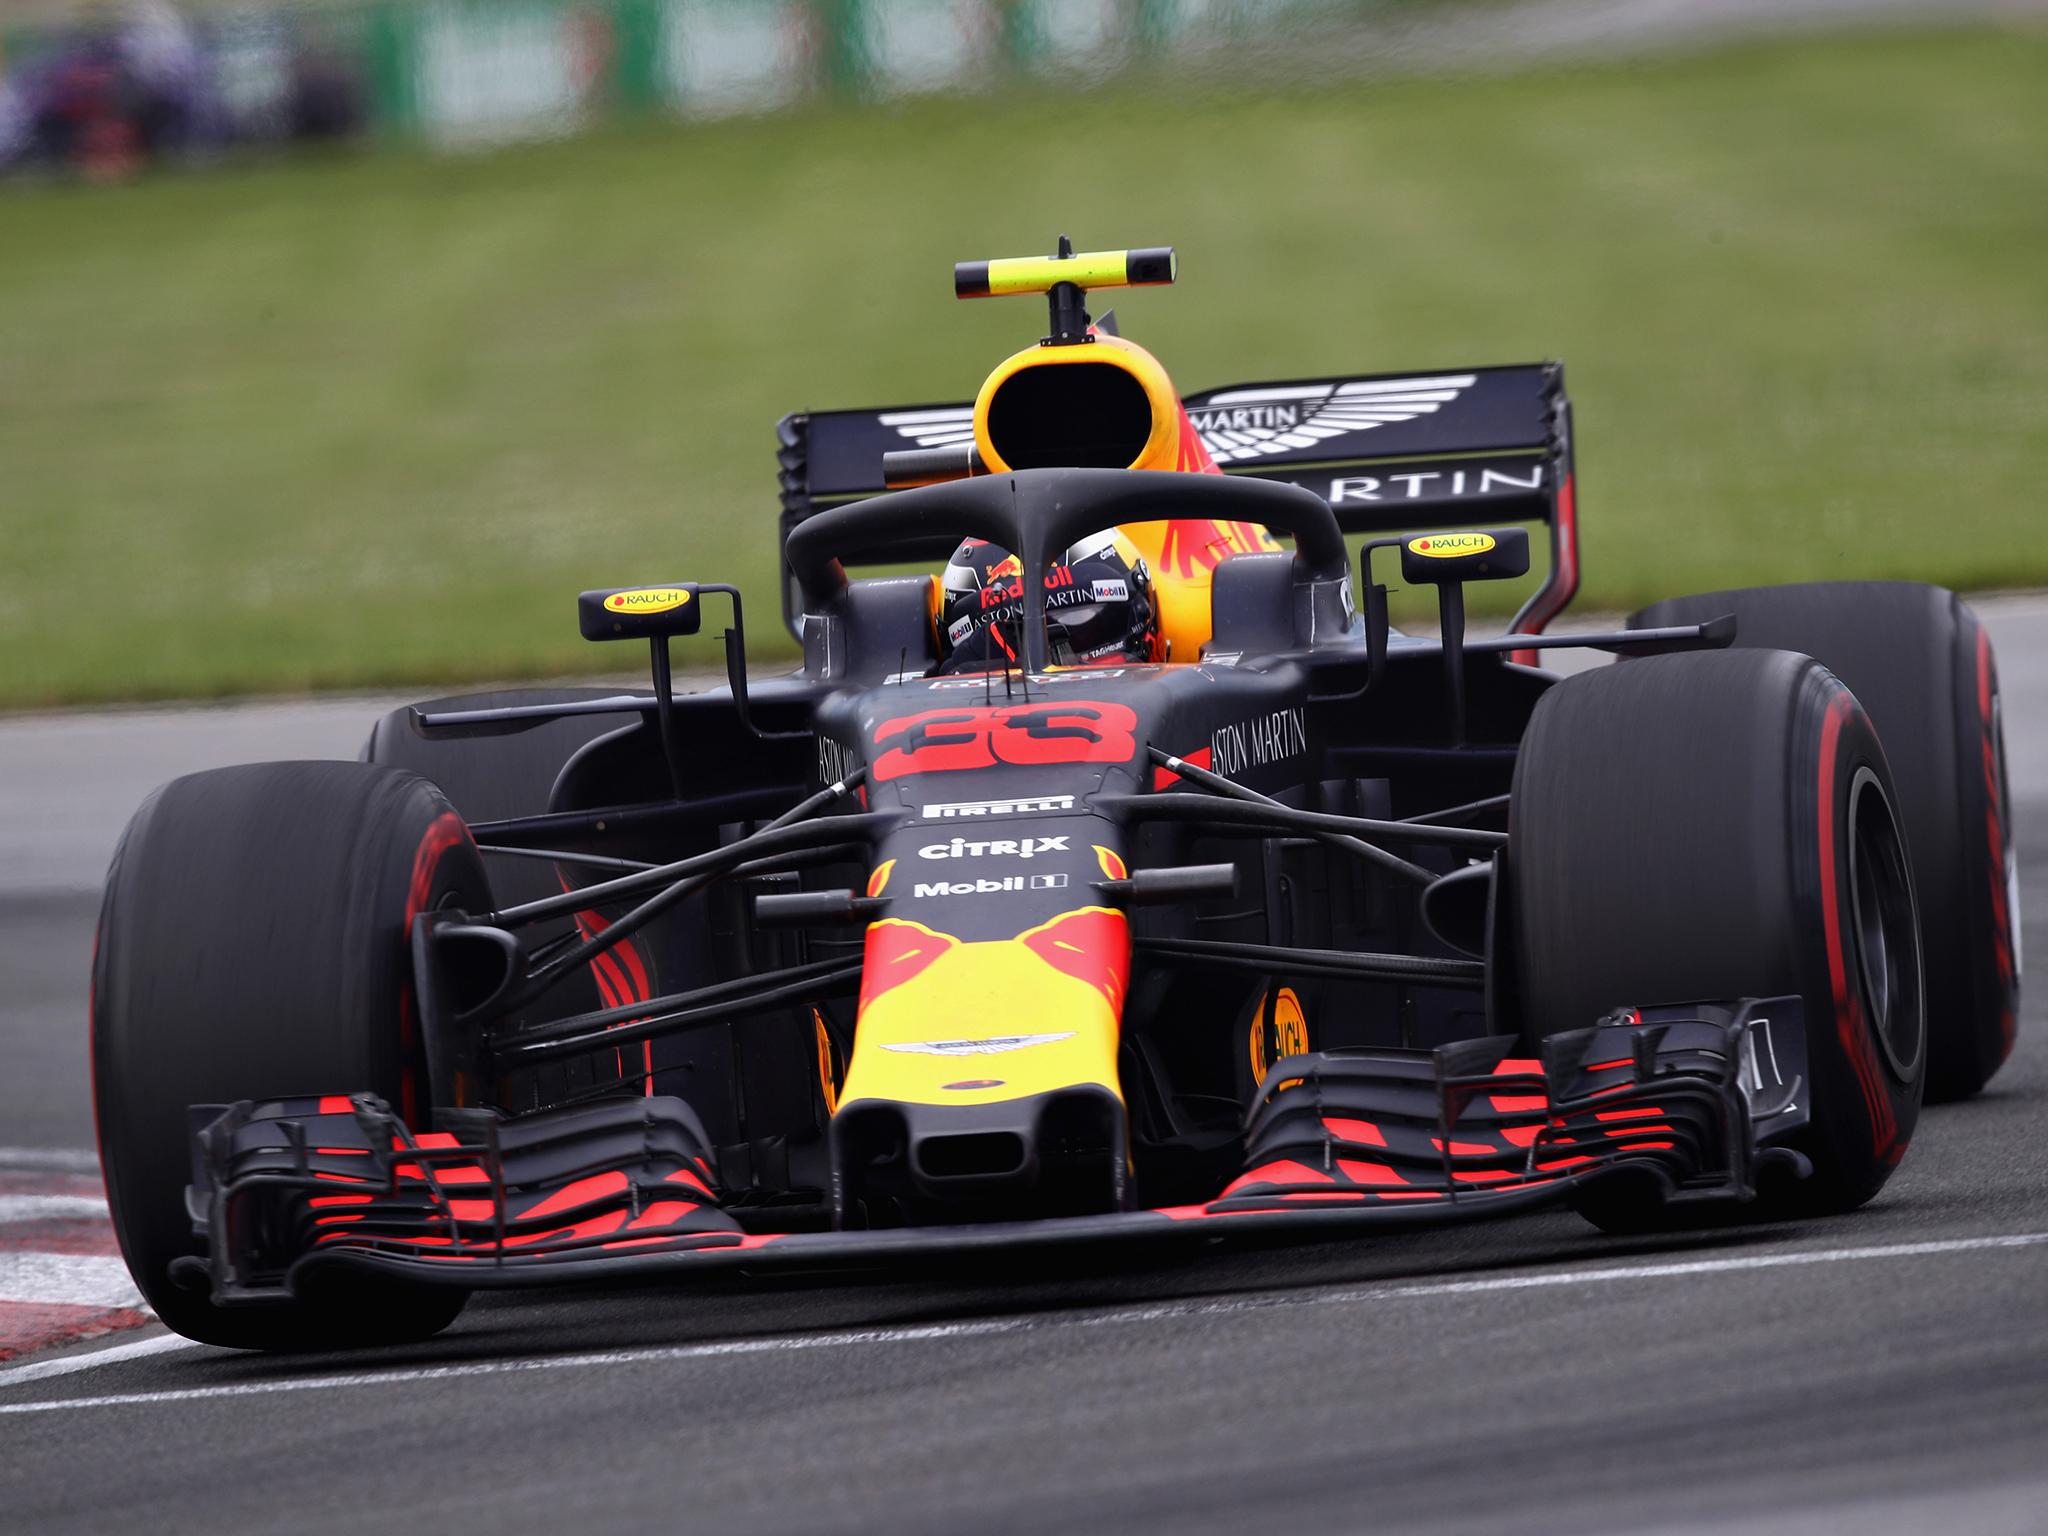 Red Bull Agree To Use Honda Engines From 19 F1 Season To End 12 Year Deal With Renault The Independent The Independent